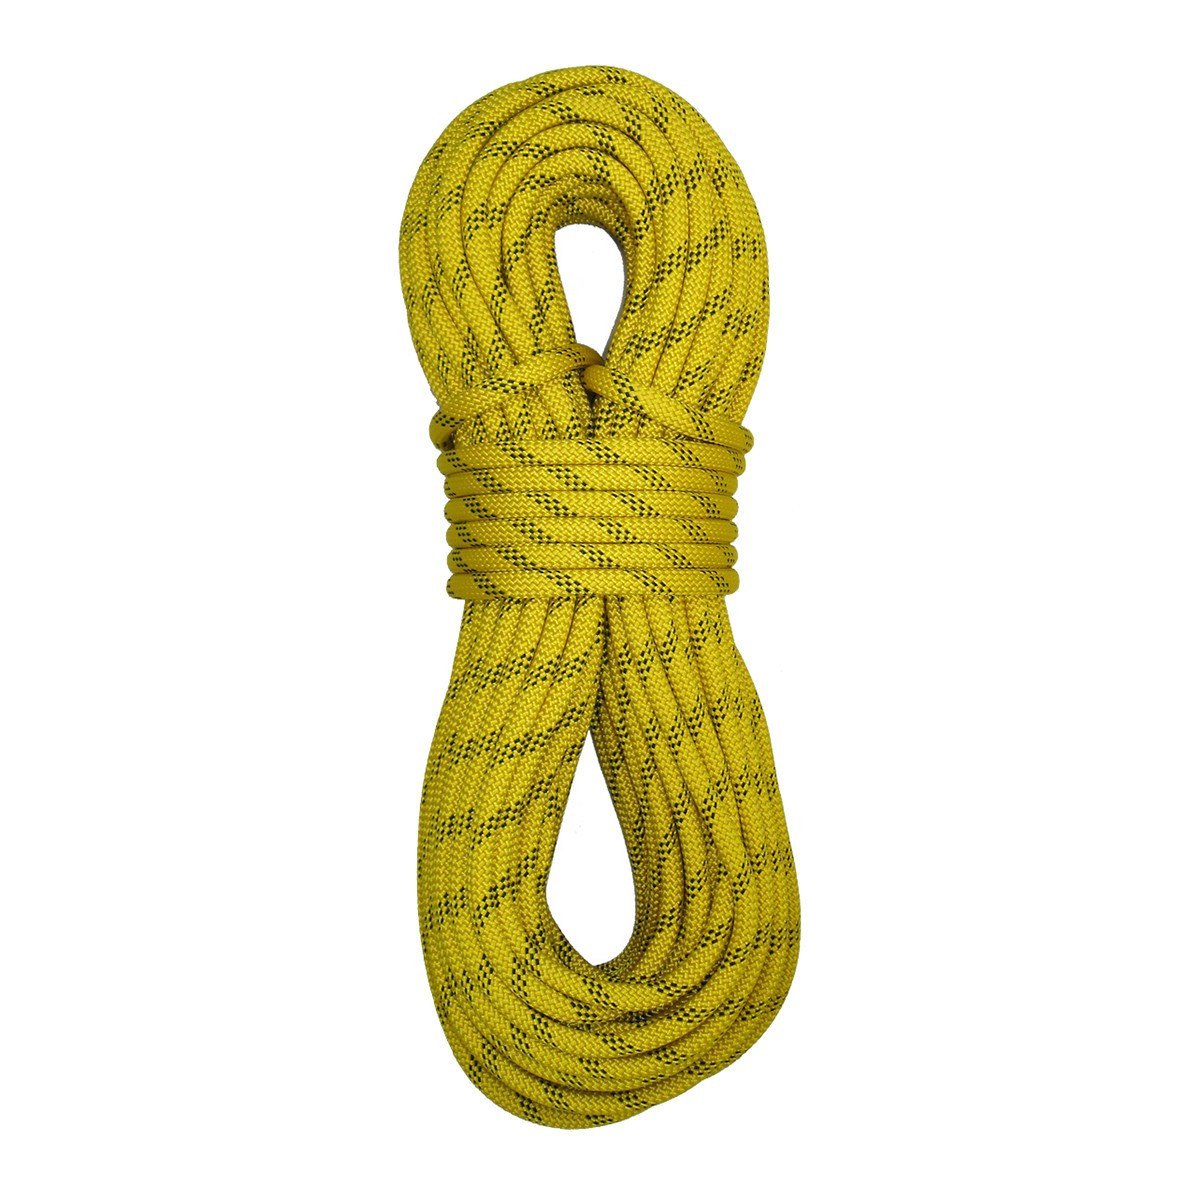 Sterling SafetyPro Static Rope 11mm ropes - Lowest prices, free